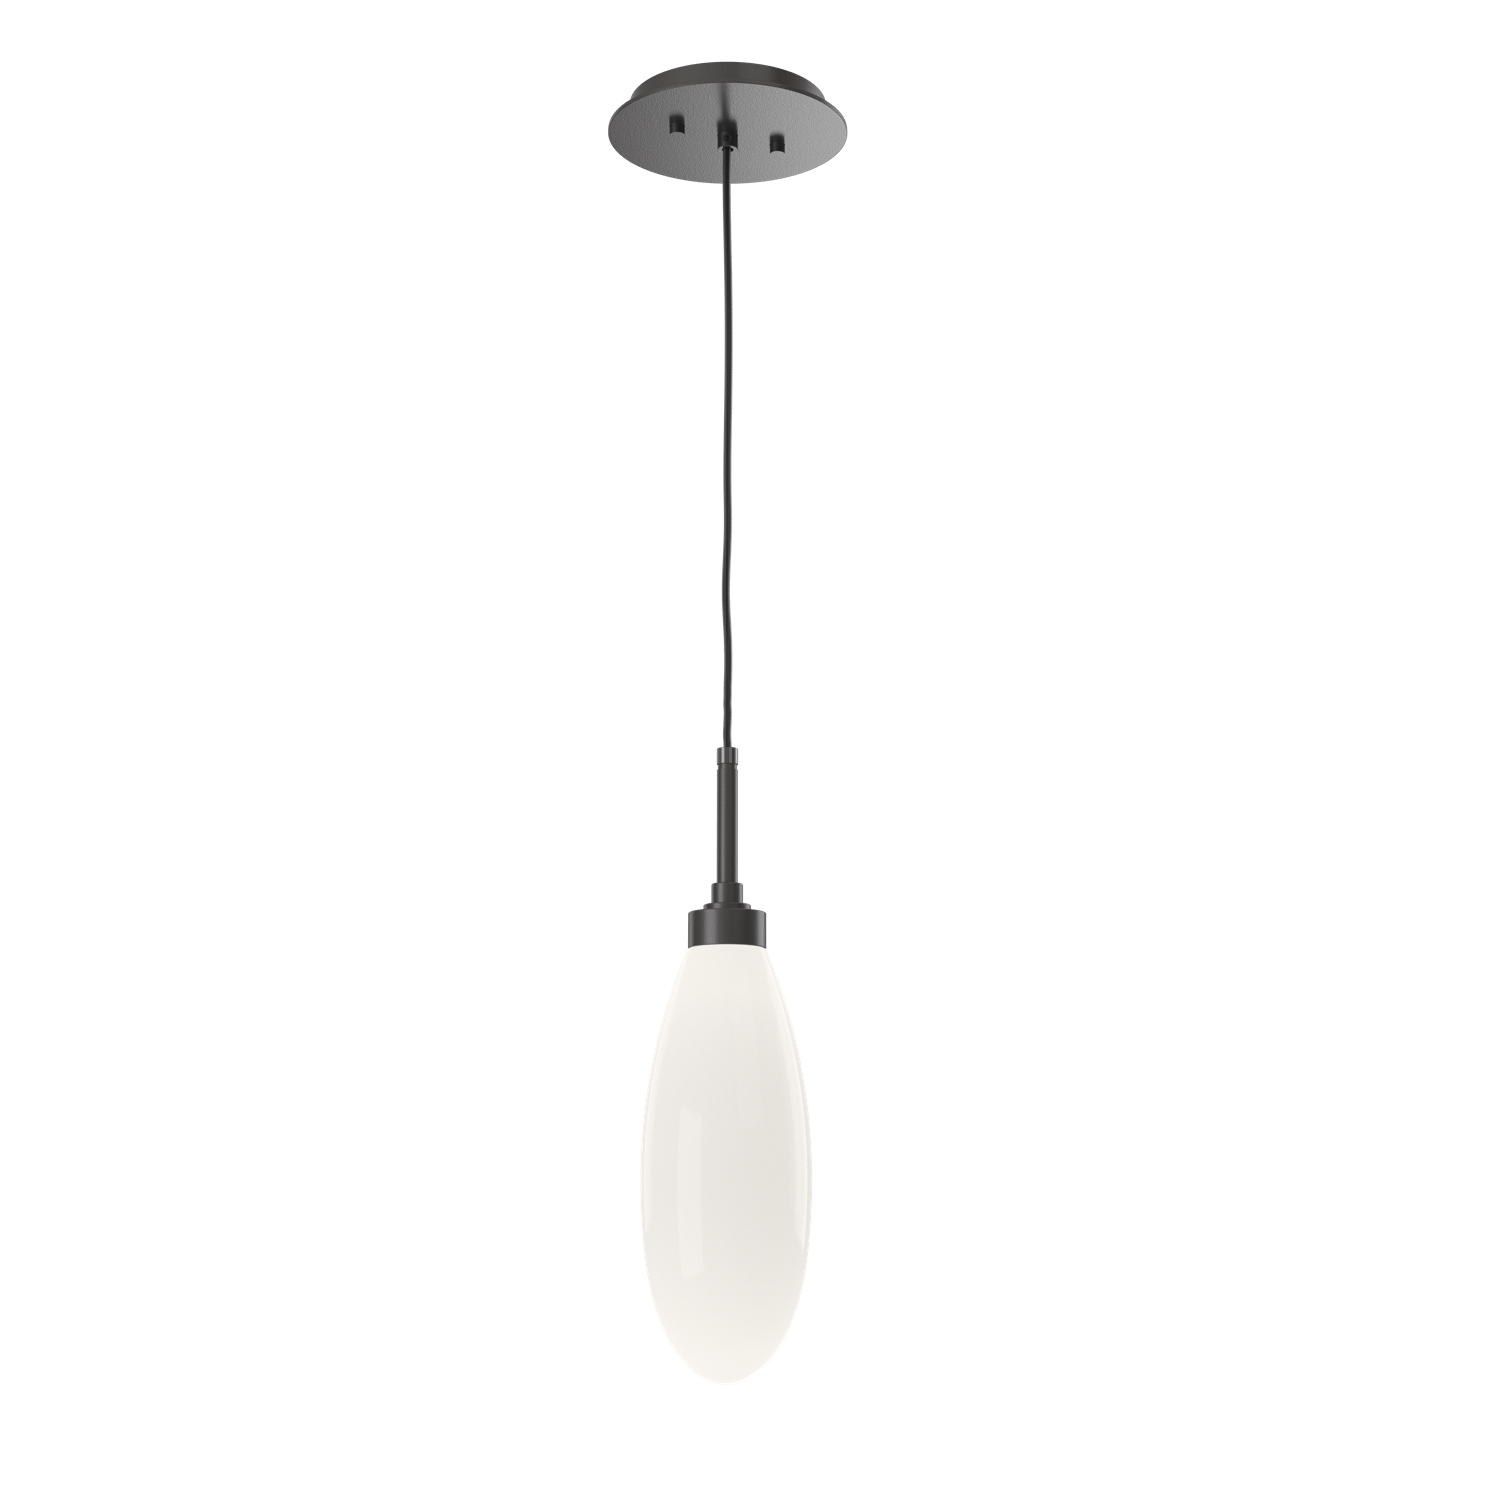 LAB0071-15-GP-WL-LL-Hammerton-Studio-Fiori-pendant-light-with-graphite-finish-and-opal-white-glass-shades-and-LED-lamping